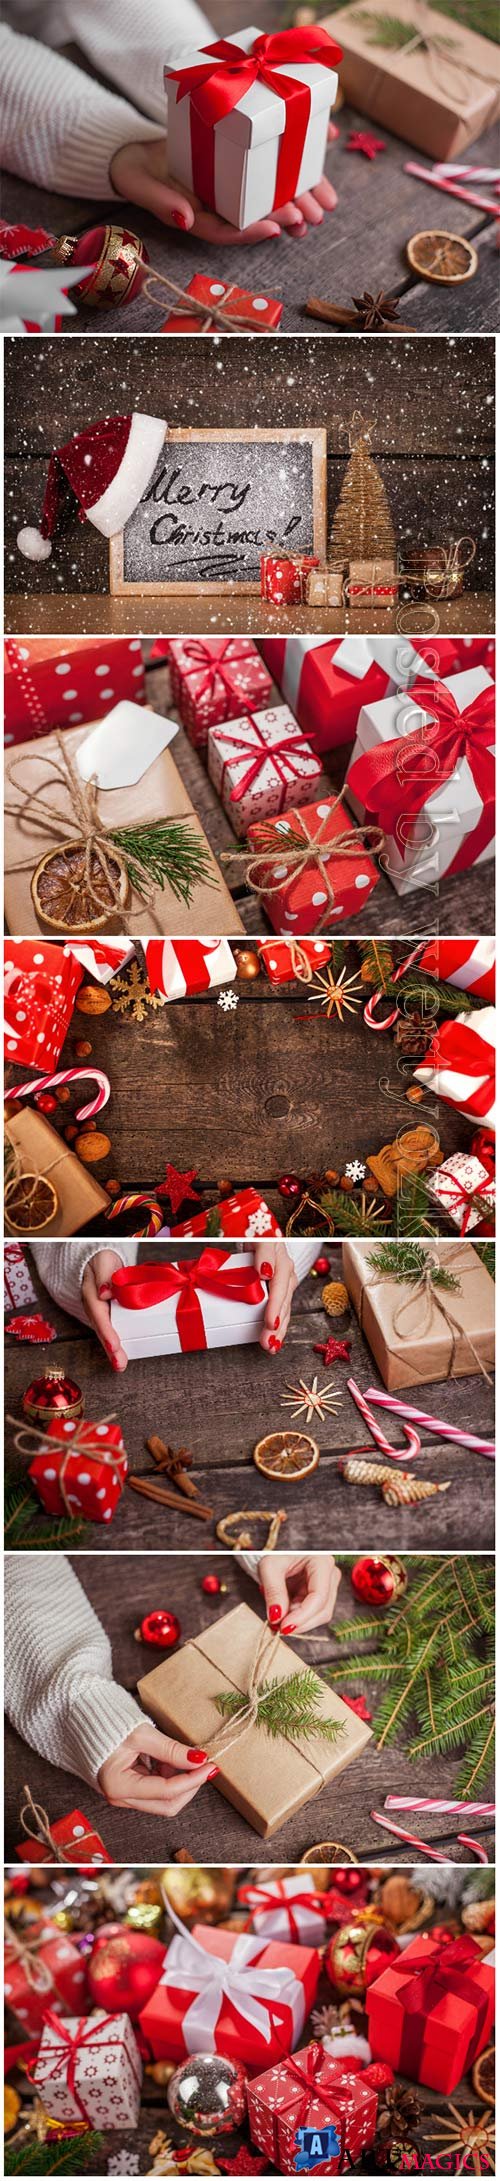 Christmas background with fir branches, candles, gifts and Christmas decorations